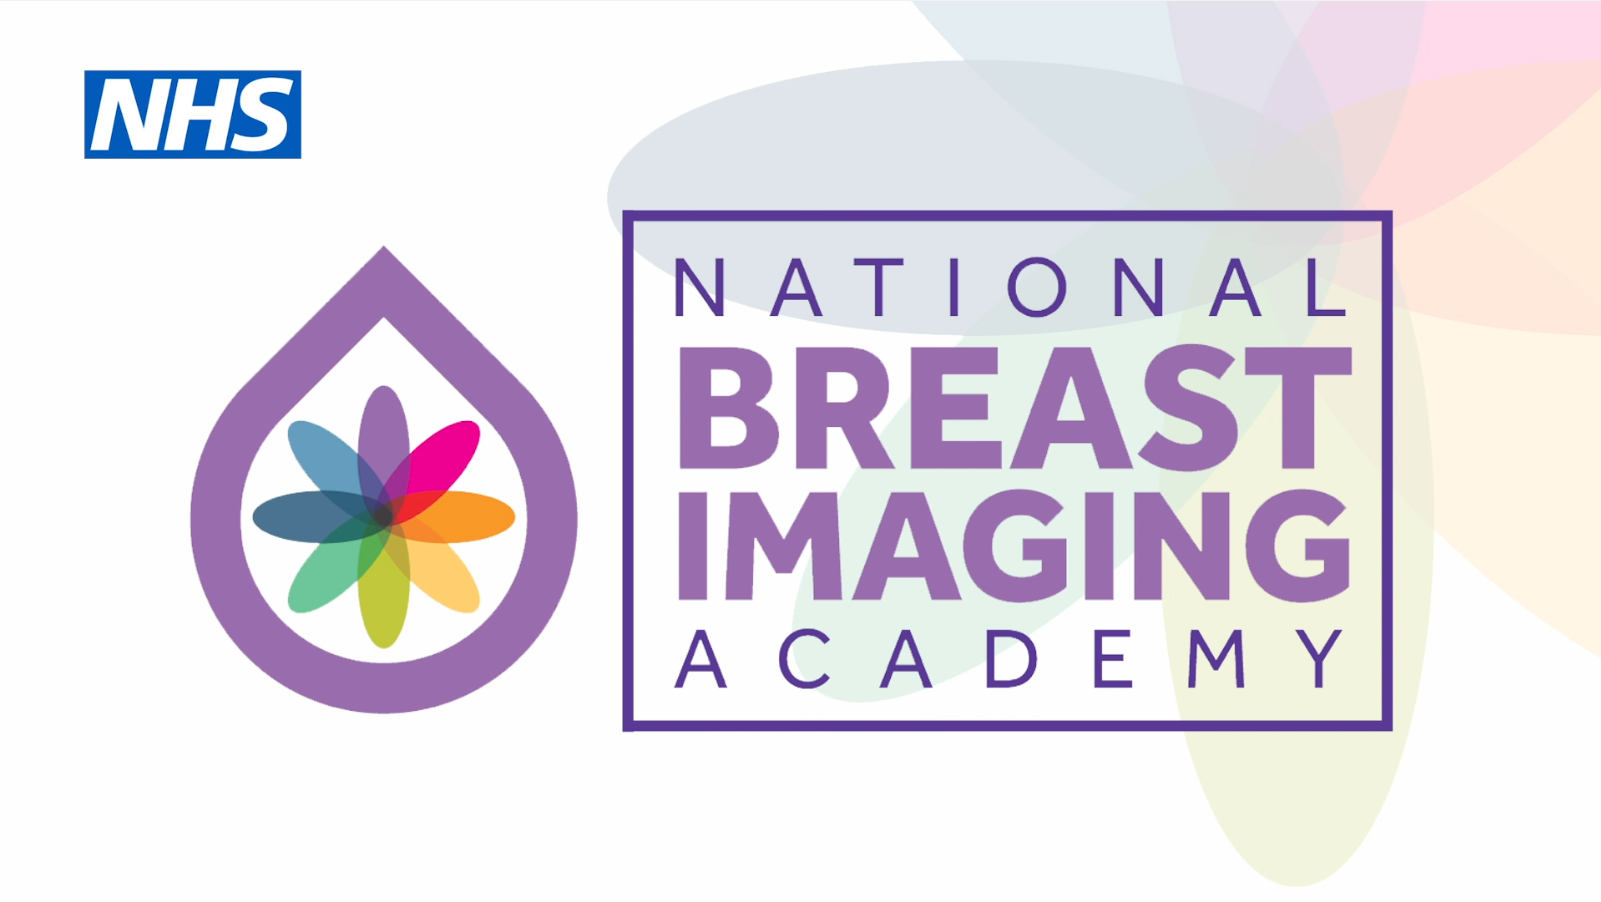 NBIA showcases breast imaging training opportunities at BSBR ASM and Medical Imaging Convention